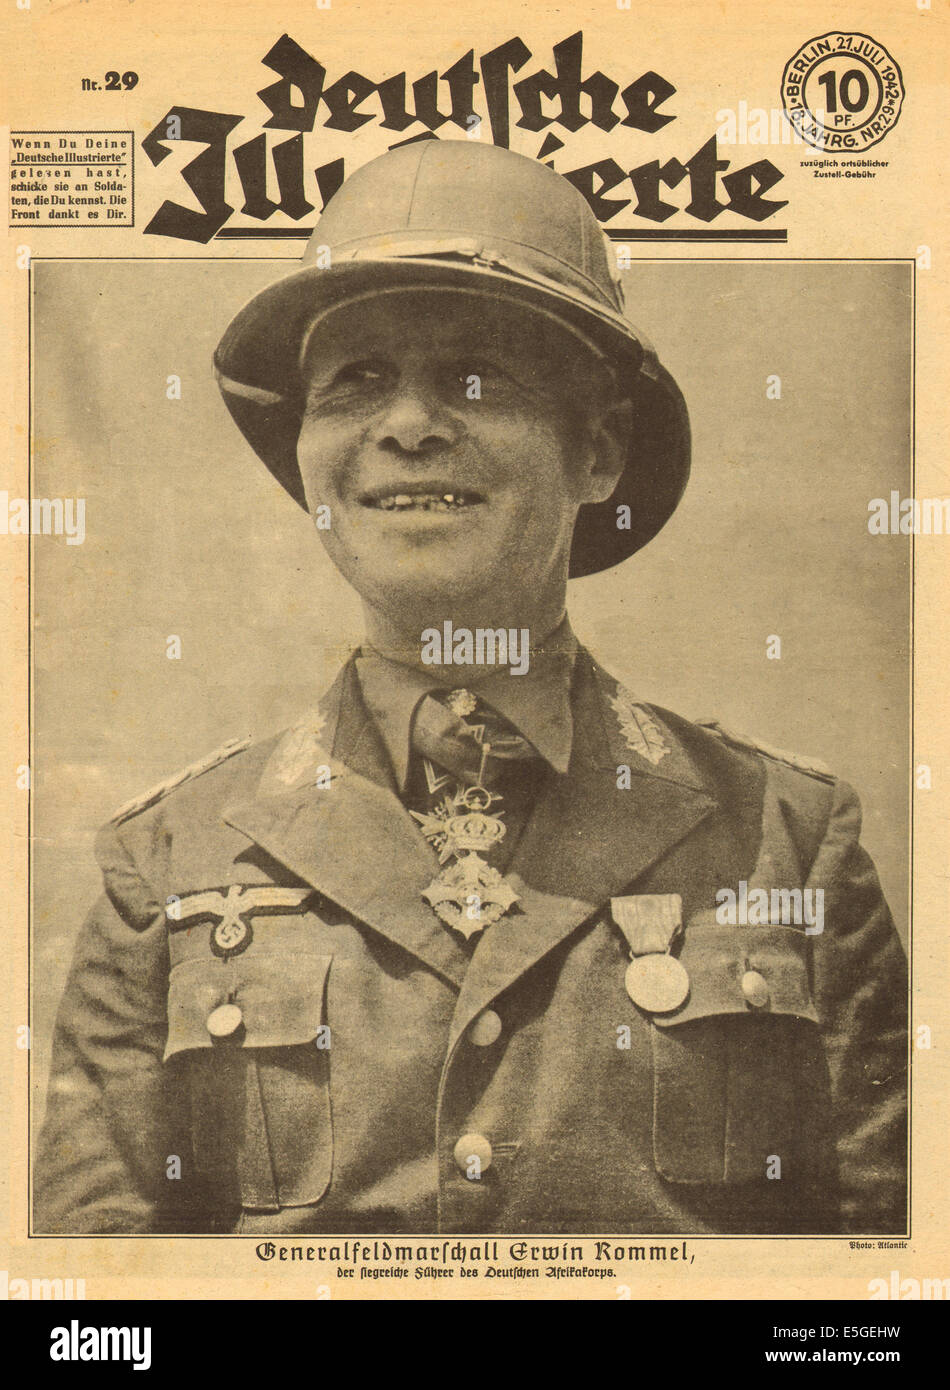 1942 Illustrierte Beobachter front page reporting Field Marshall Erwin Rommel in North Africa Stock Photo